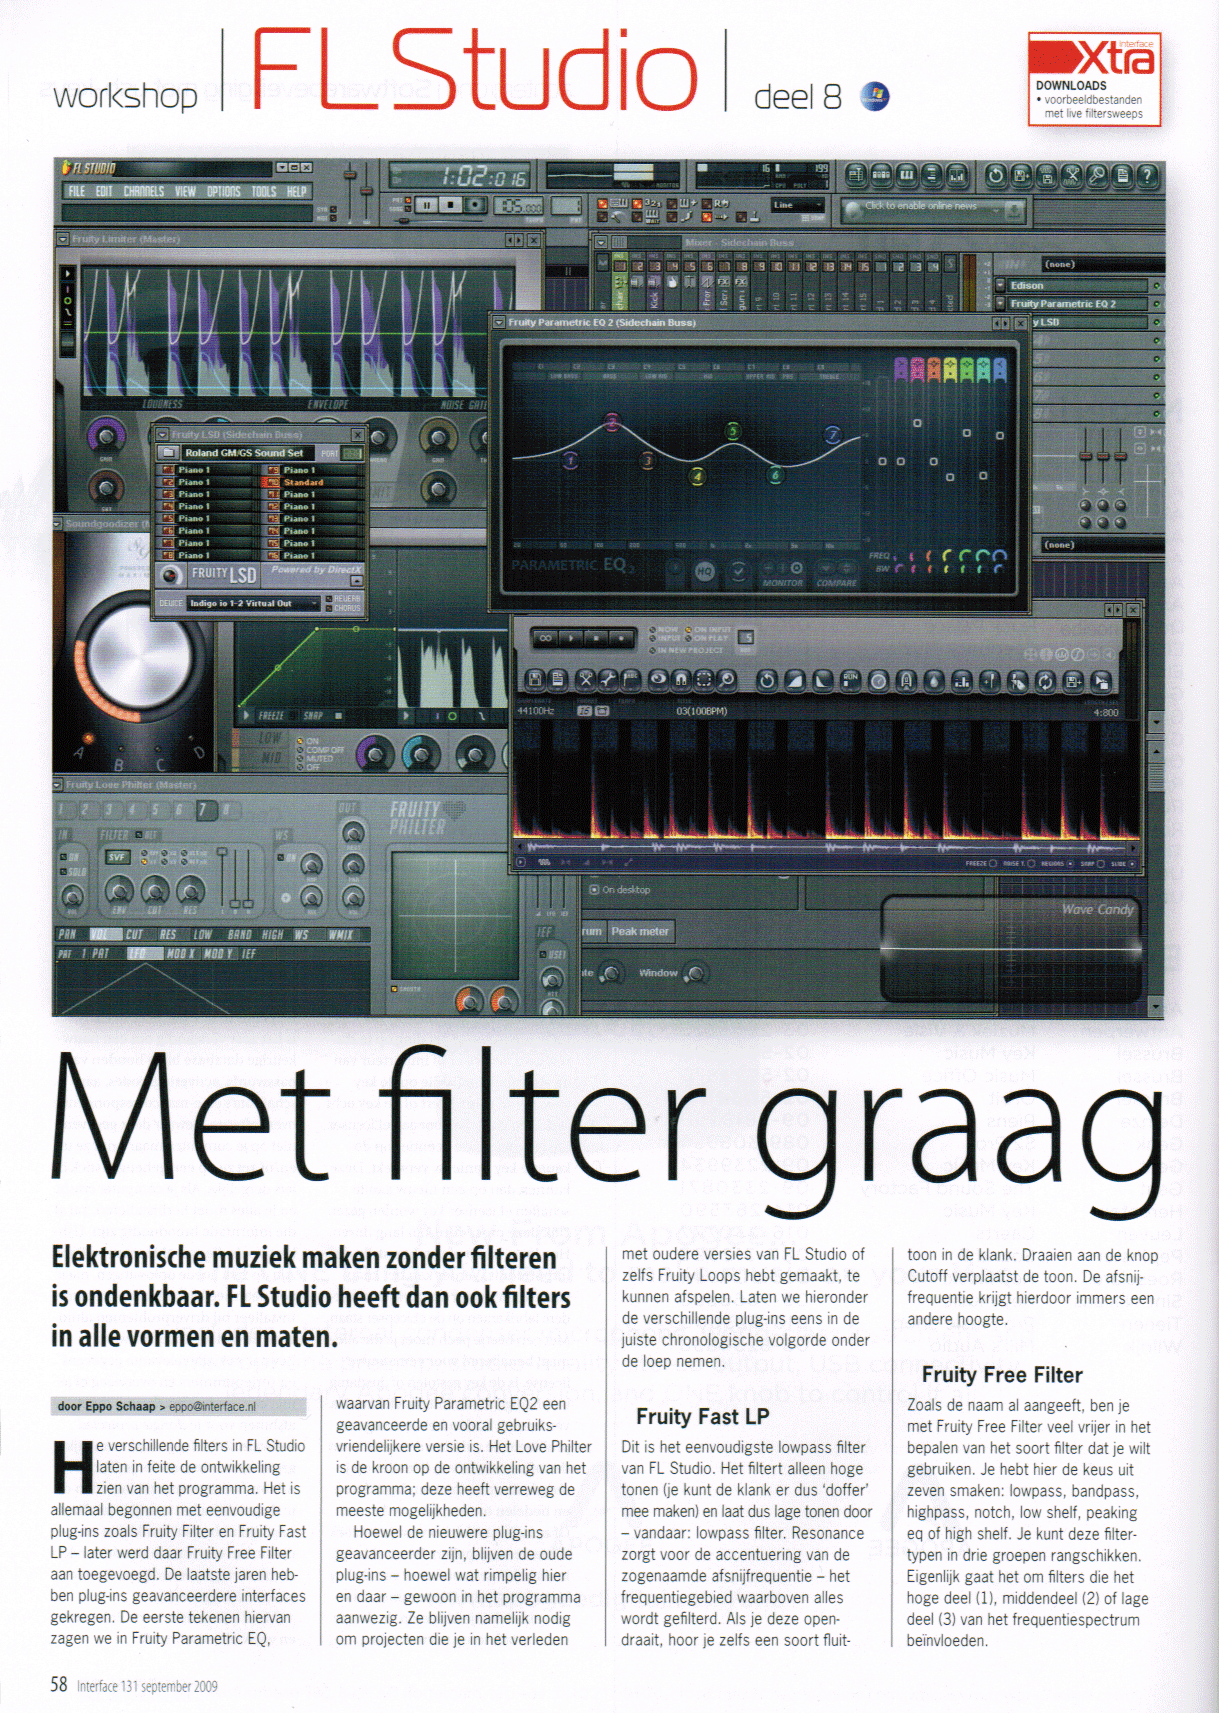 interface-Sept2009-page01.gif